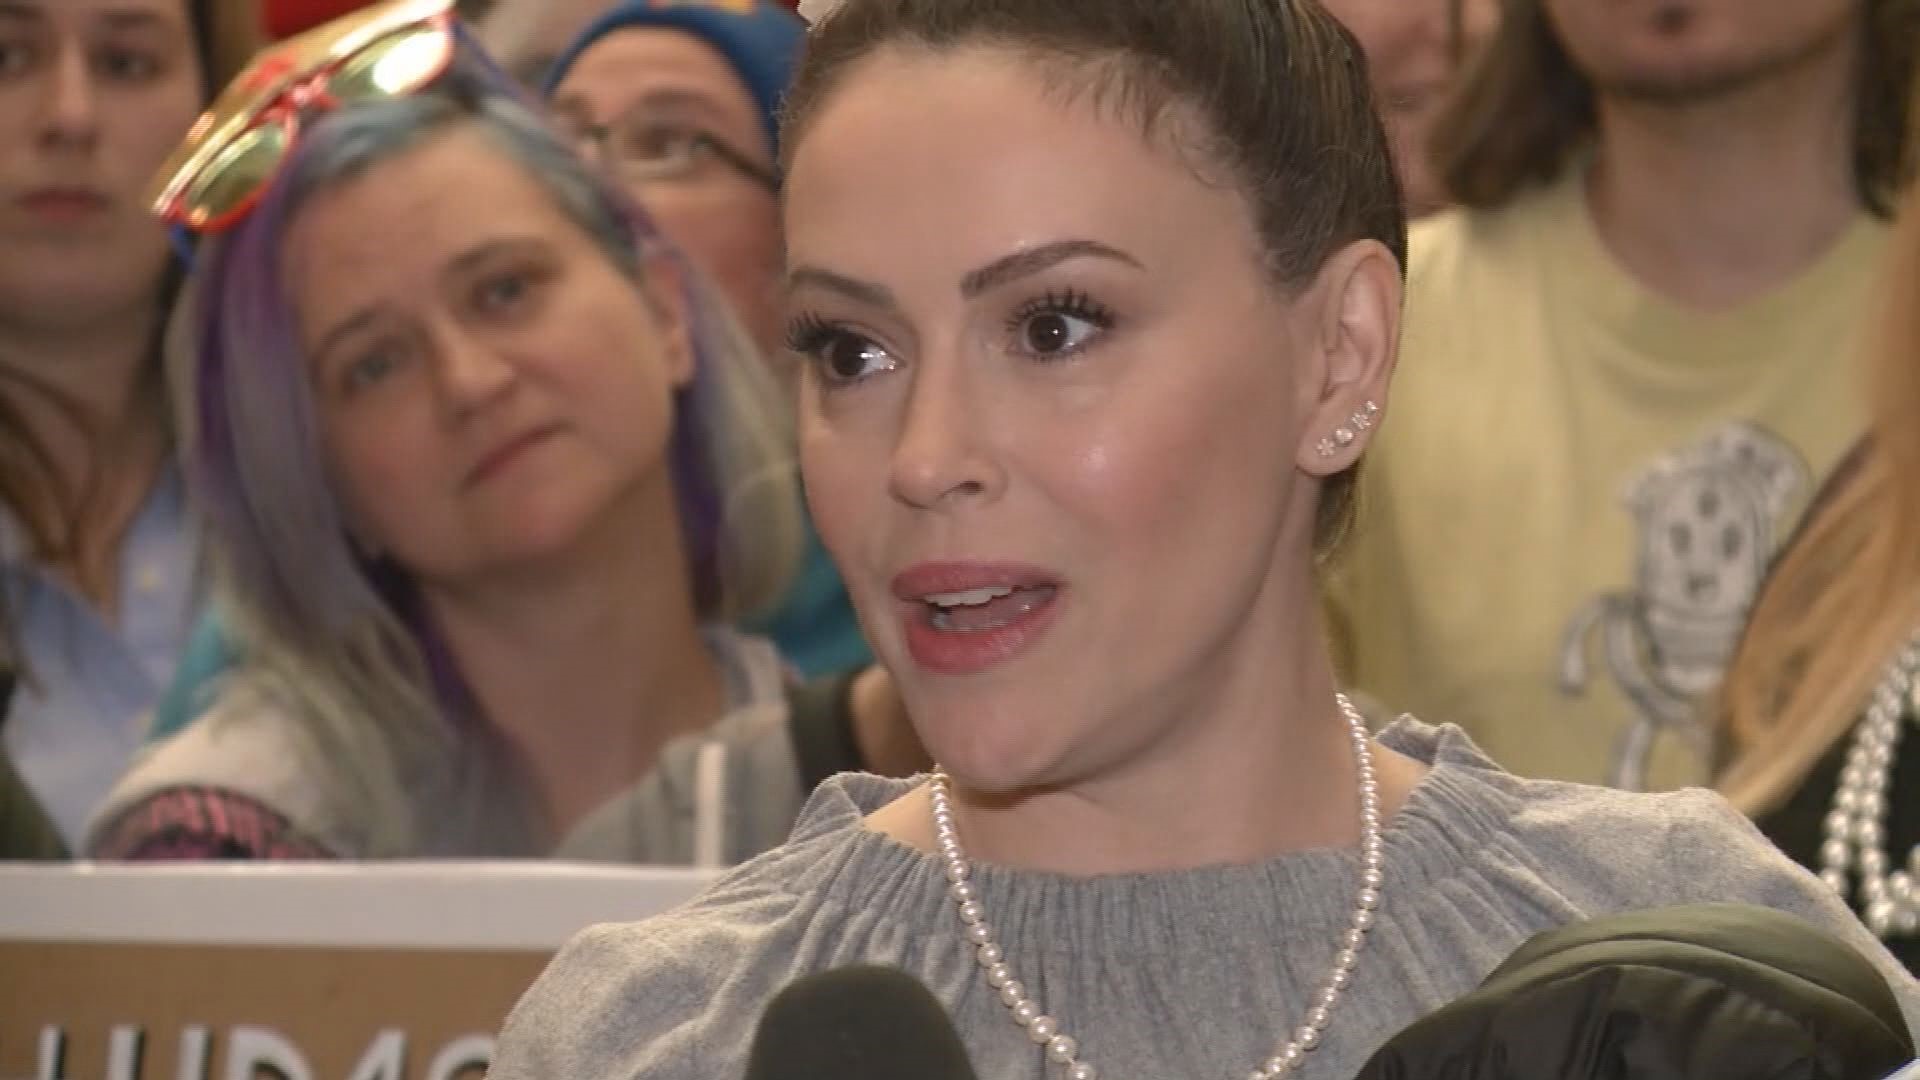 Actress Alyssa Milano and members of the Georgia film and television industry gathered outside Governor Brian Kemp’s office at the State Capitol, hoping to convince him not to sign into law HB 481, a bill that would restrict abortions in Georgia.